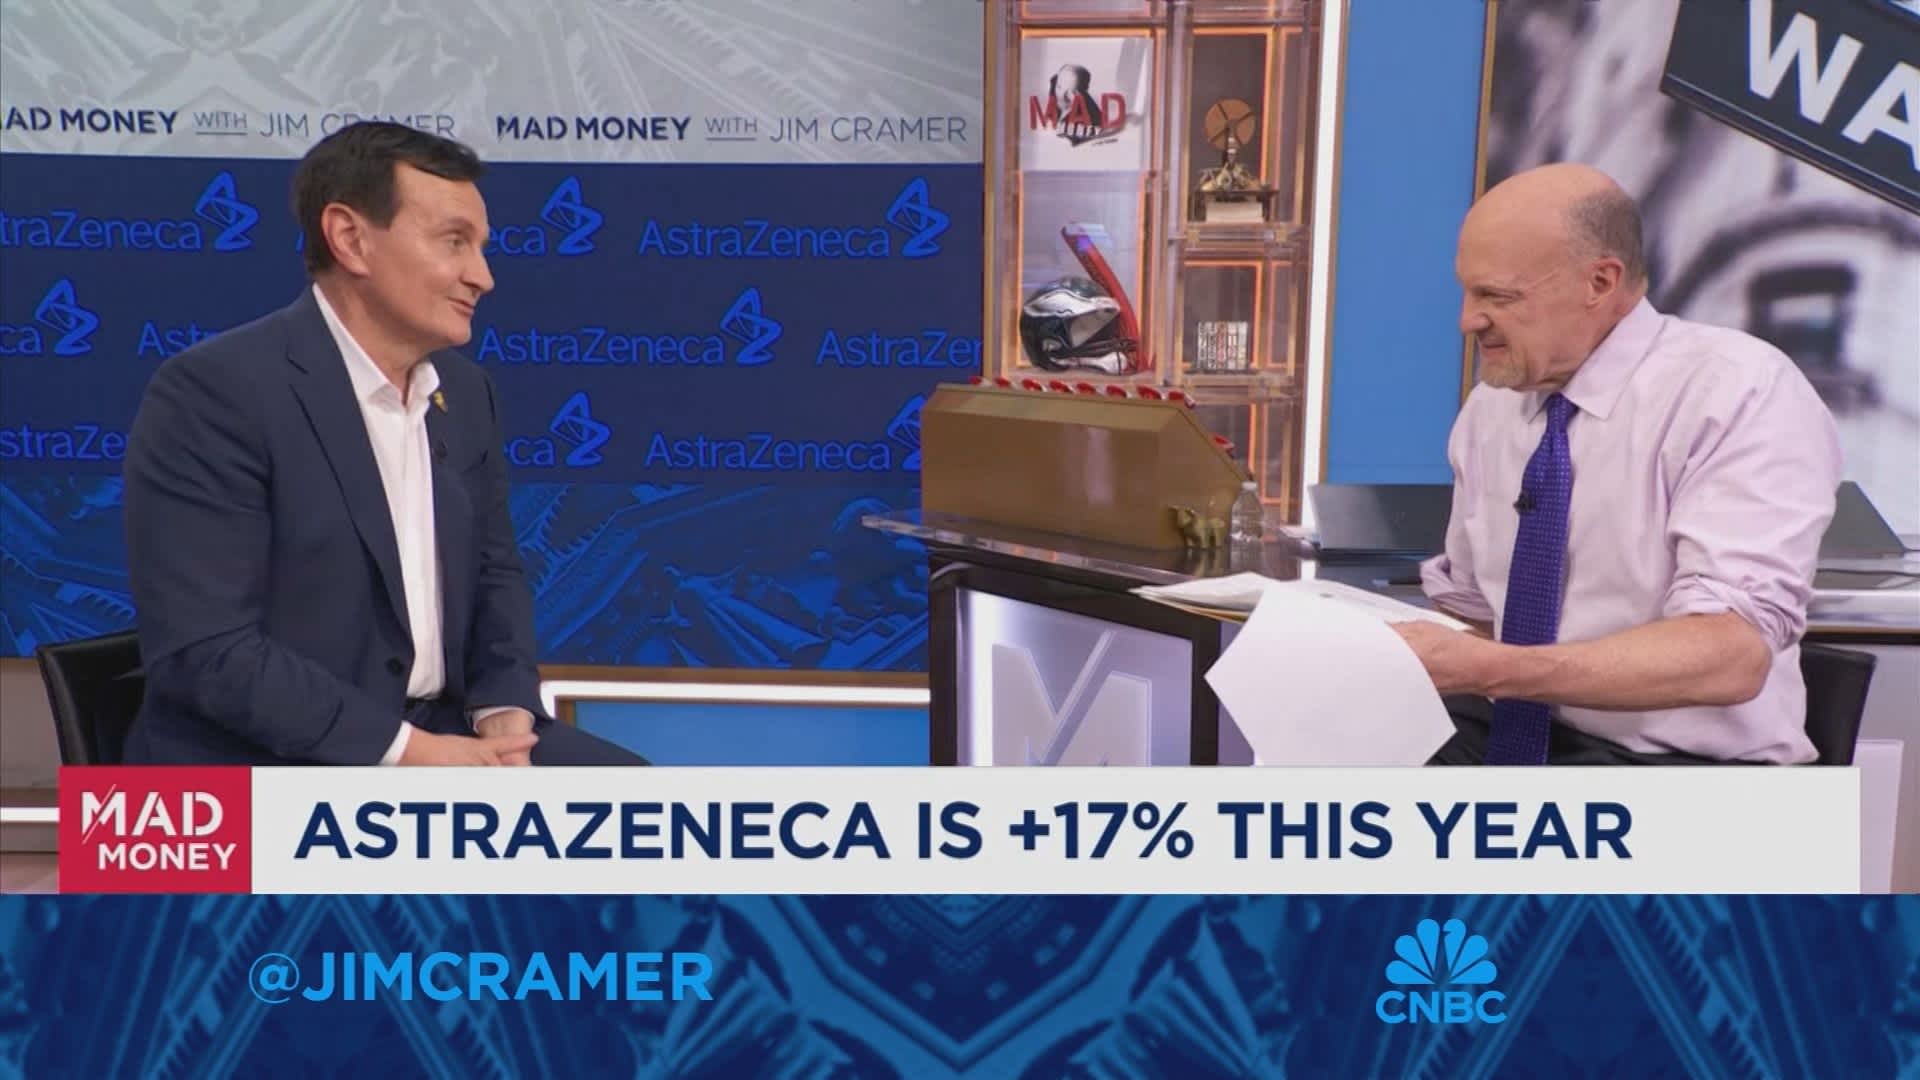 We’re in a difficult business but have the right level of confidence, says AstraZeneca CEO [Video]